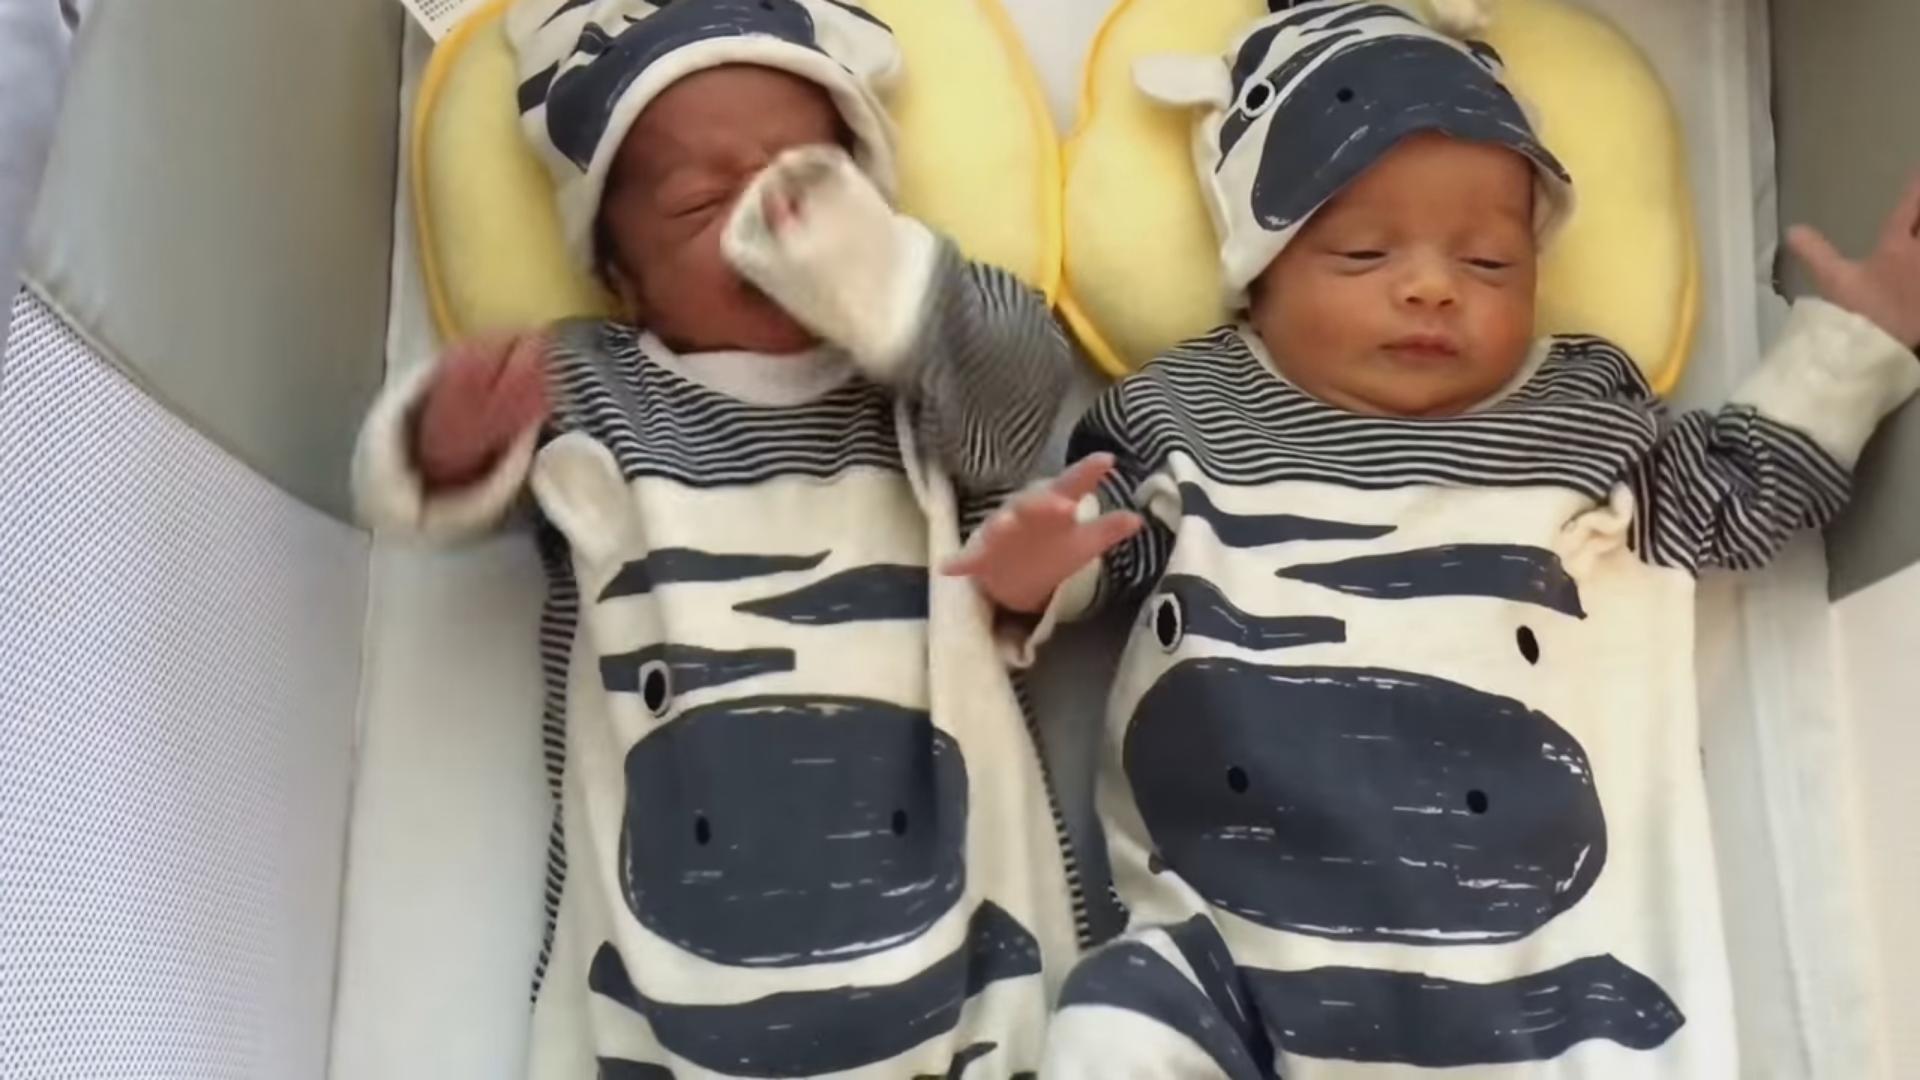 Twin Babies Dancing Together in Matching Zebra Outfits